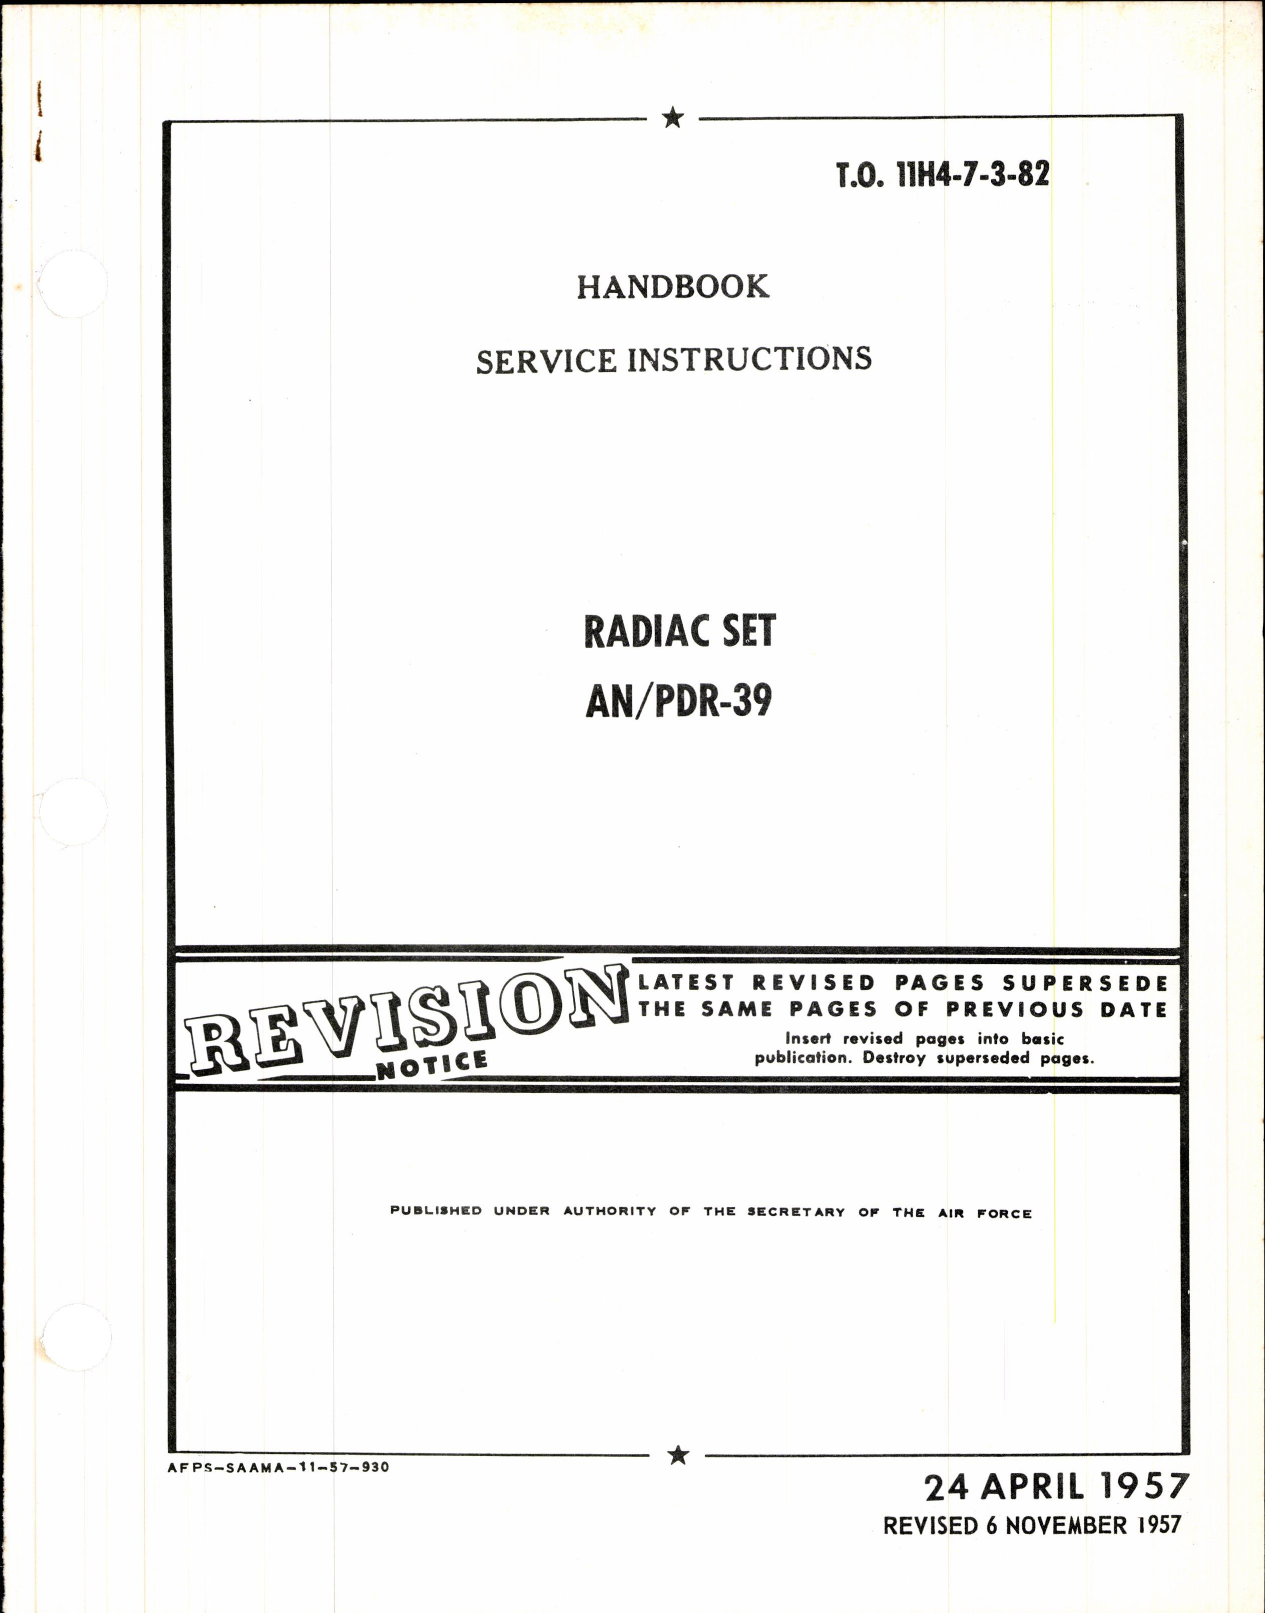 Sample page 1 from AirCorps Library document: Service Instructions for Radiac Set AN/PDR-39